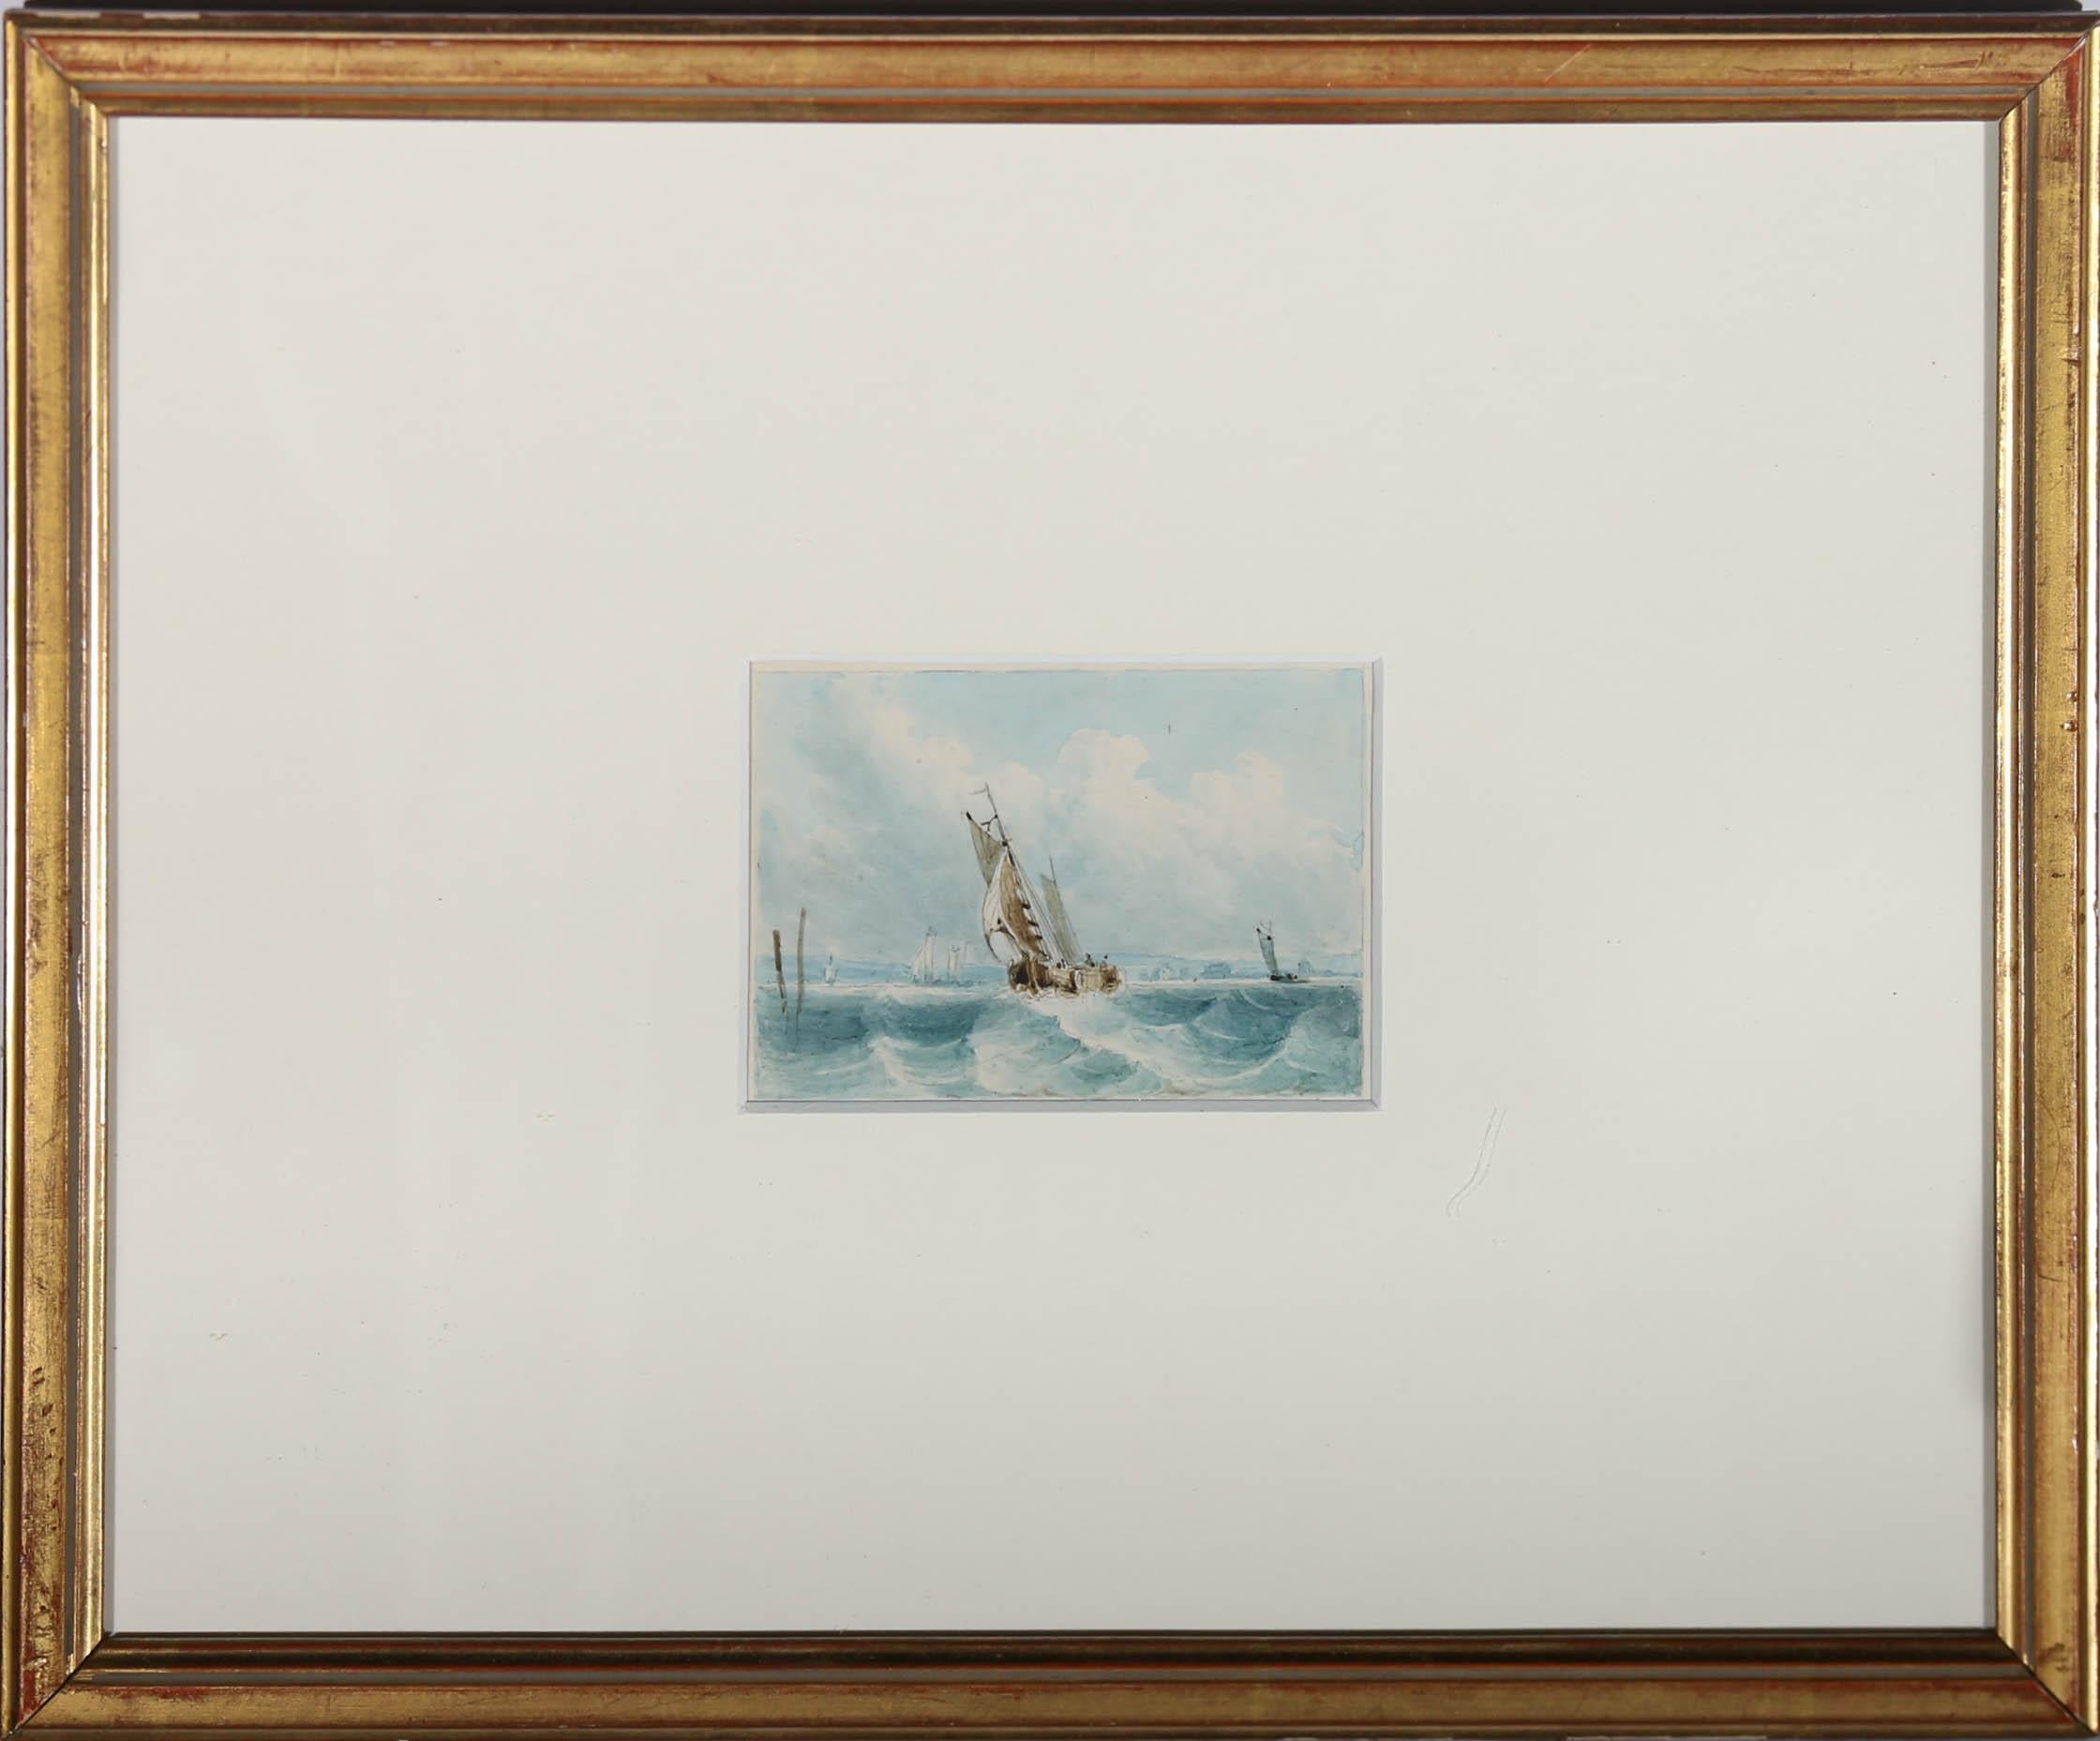 A fine watercolour by french painter Frederic Bourgeois de Mercey (1805-1860), depicting a choppy maritime scene off the coast of Hurst castle, Lymington. Caught in blustery weather, several white ships can be seen battling sea waves in the